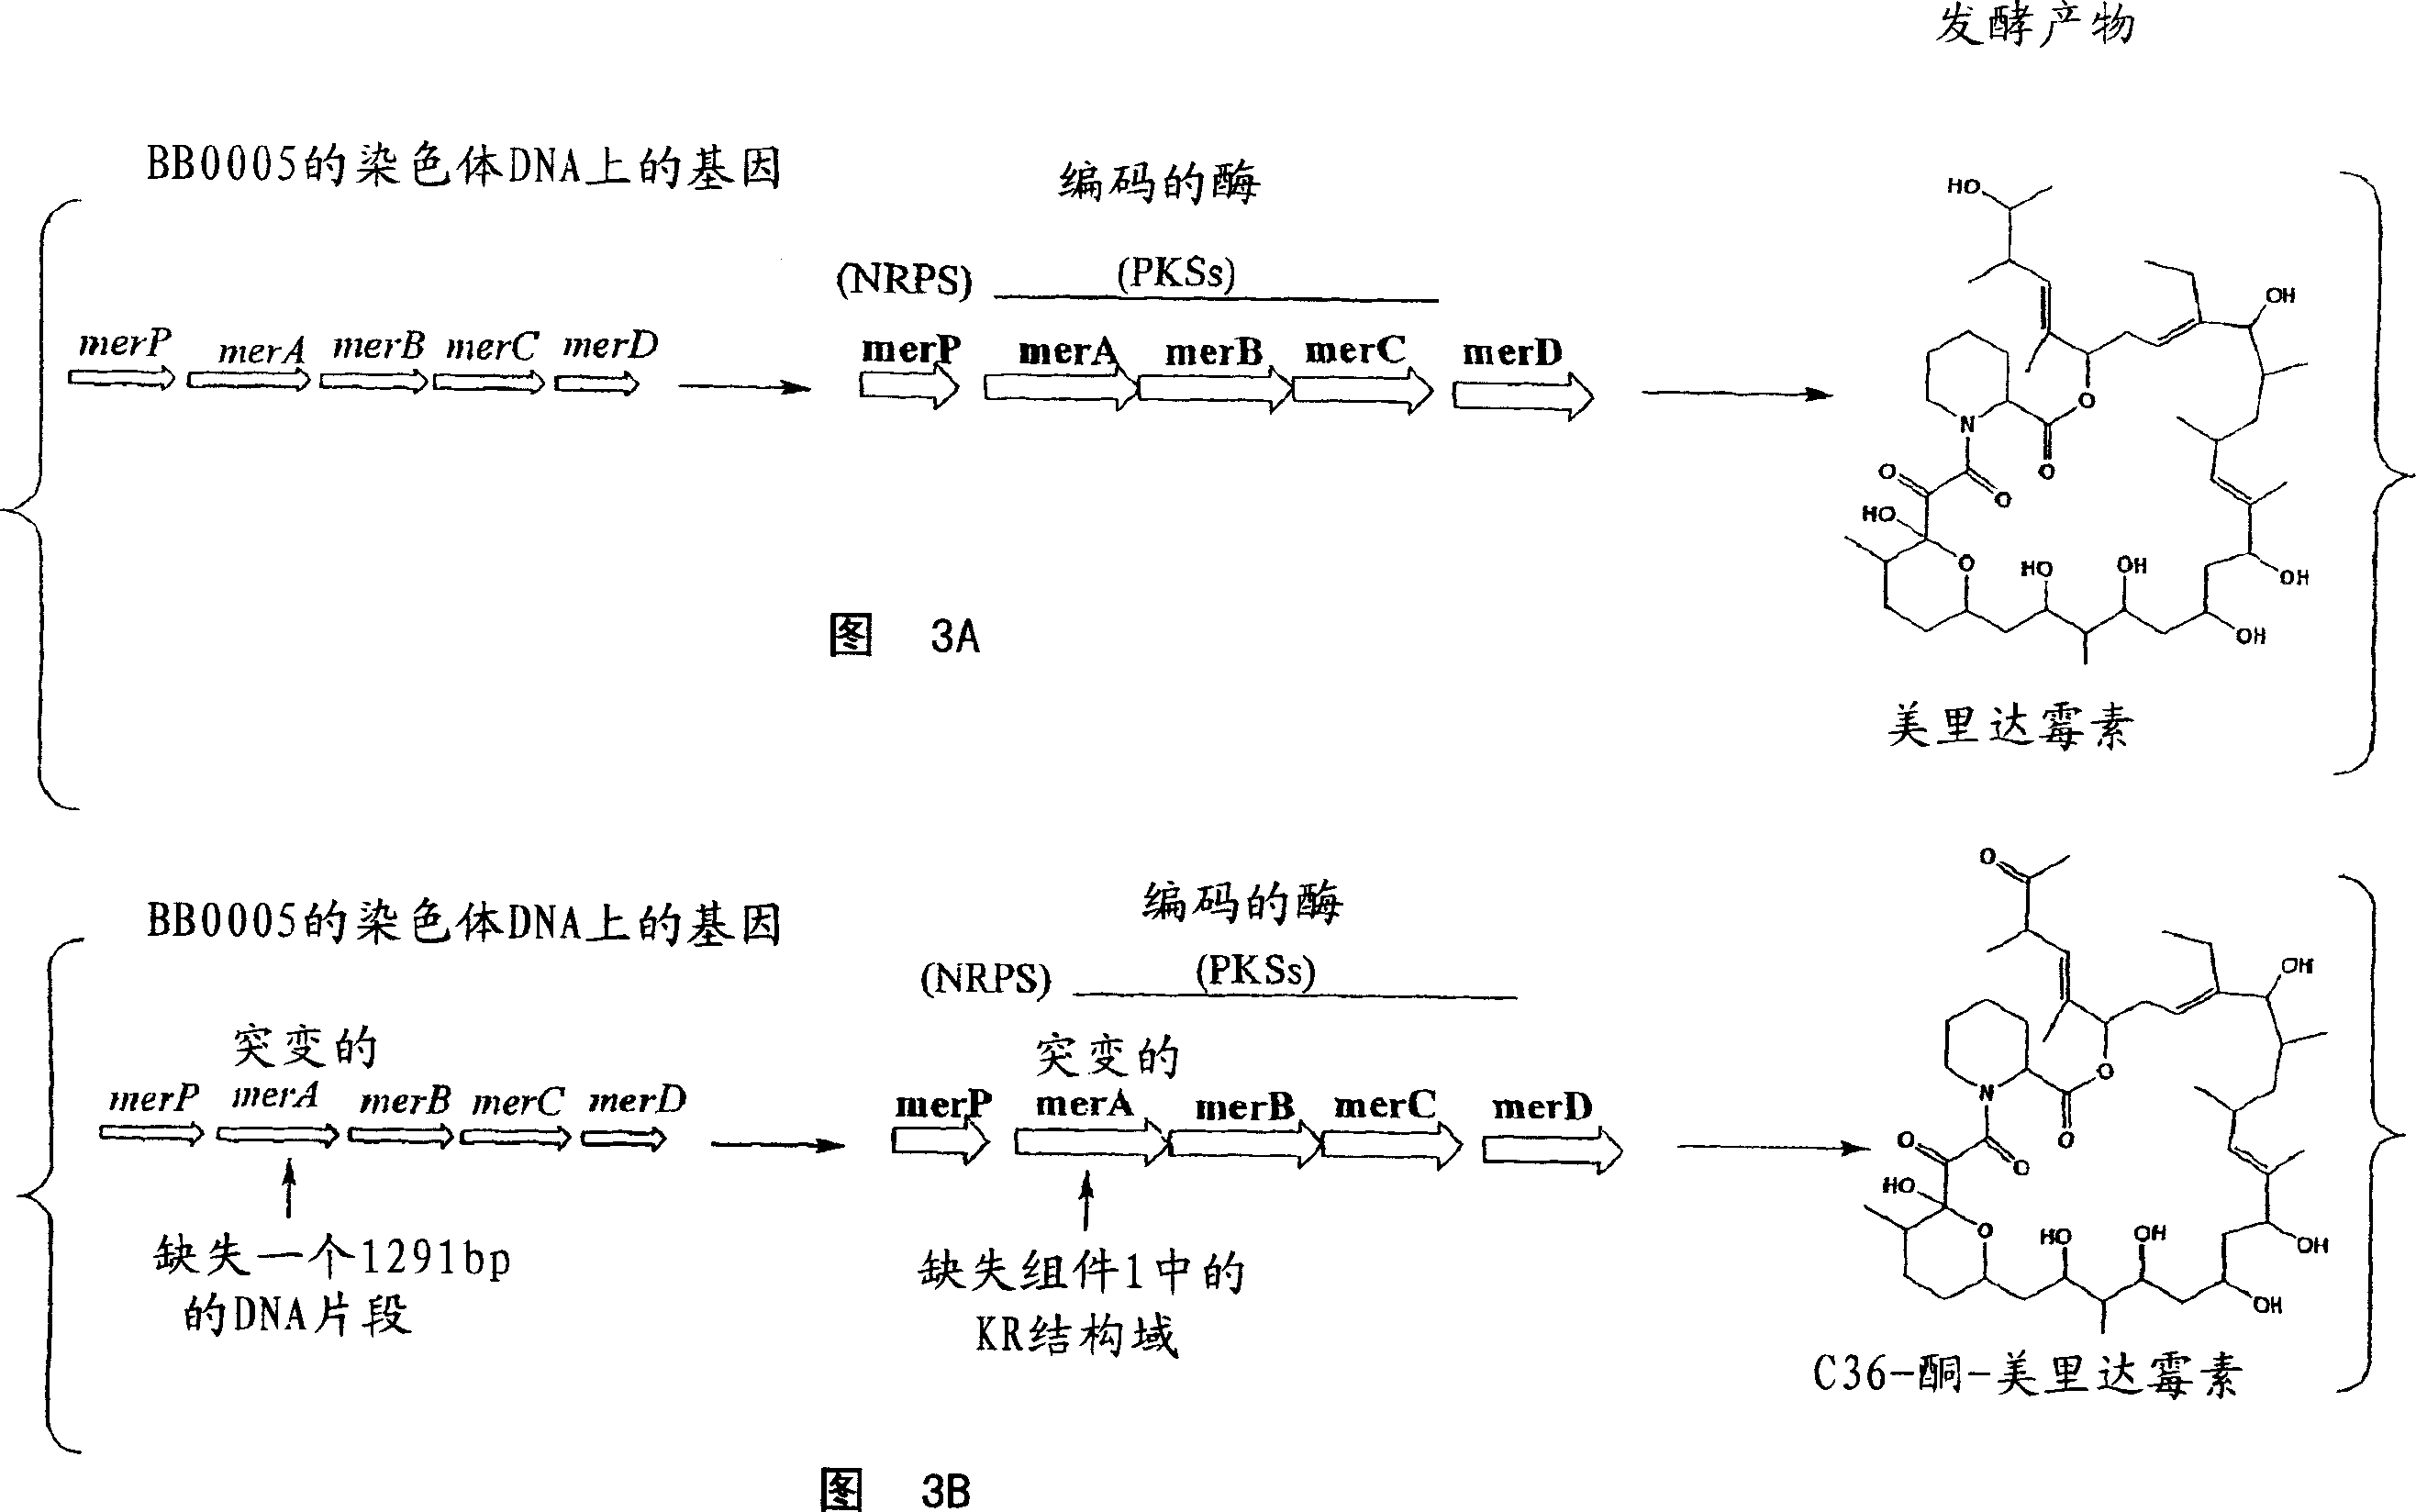 Biosynthetic gene cluster for the production of a complex polyketide